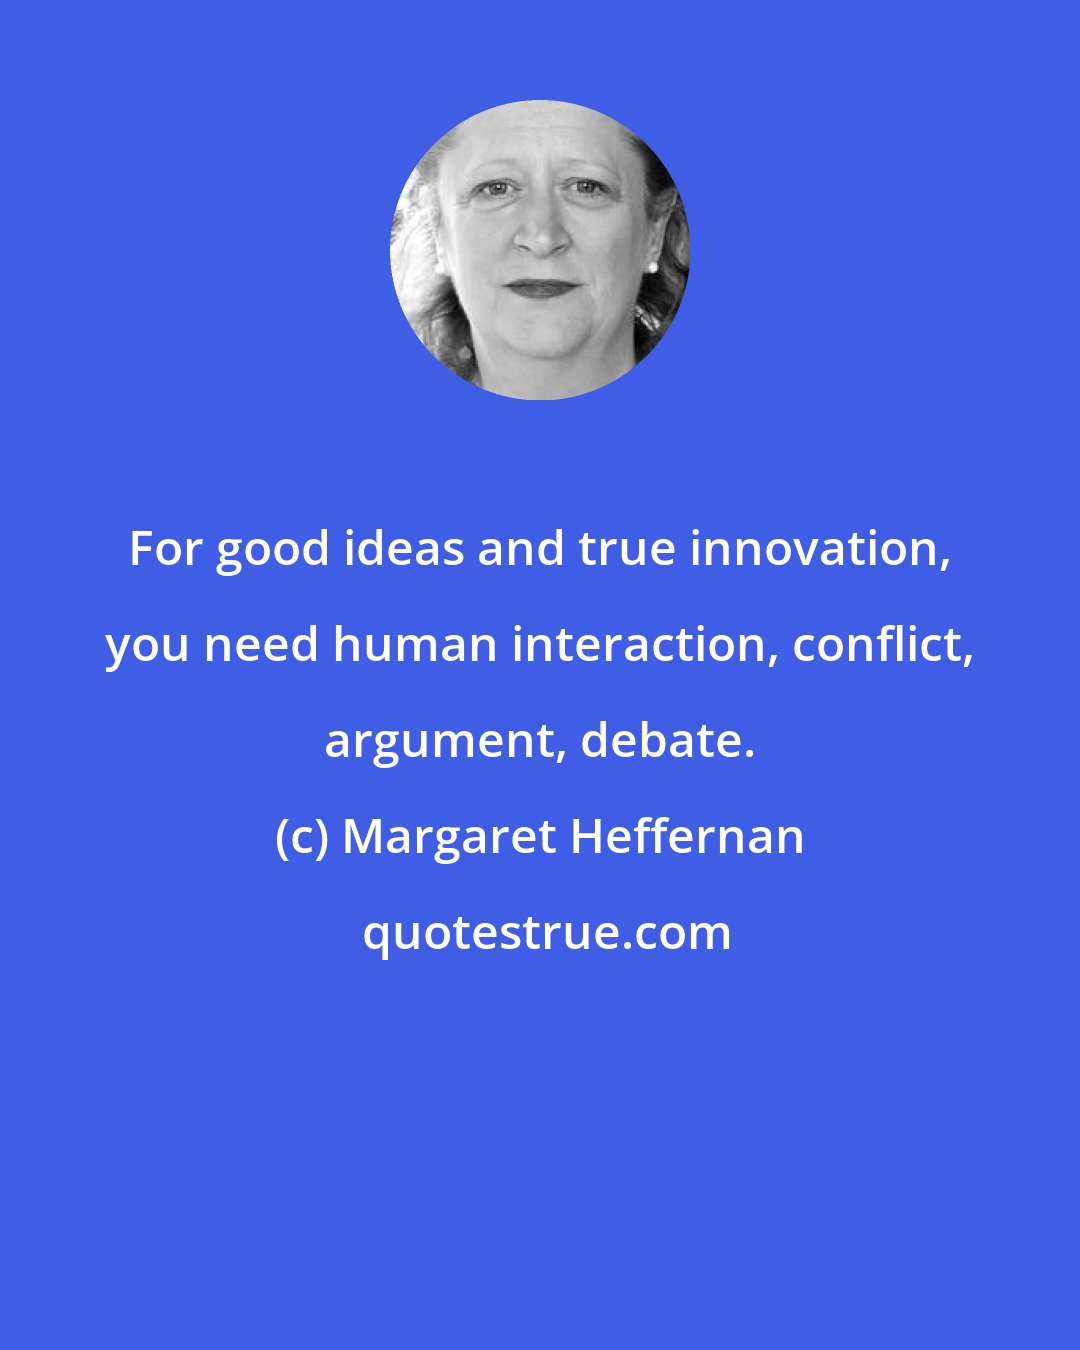 Margaret Heffernan: For good ideas and true innovation, you need human interaction, conflict, argument, debate.